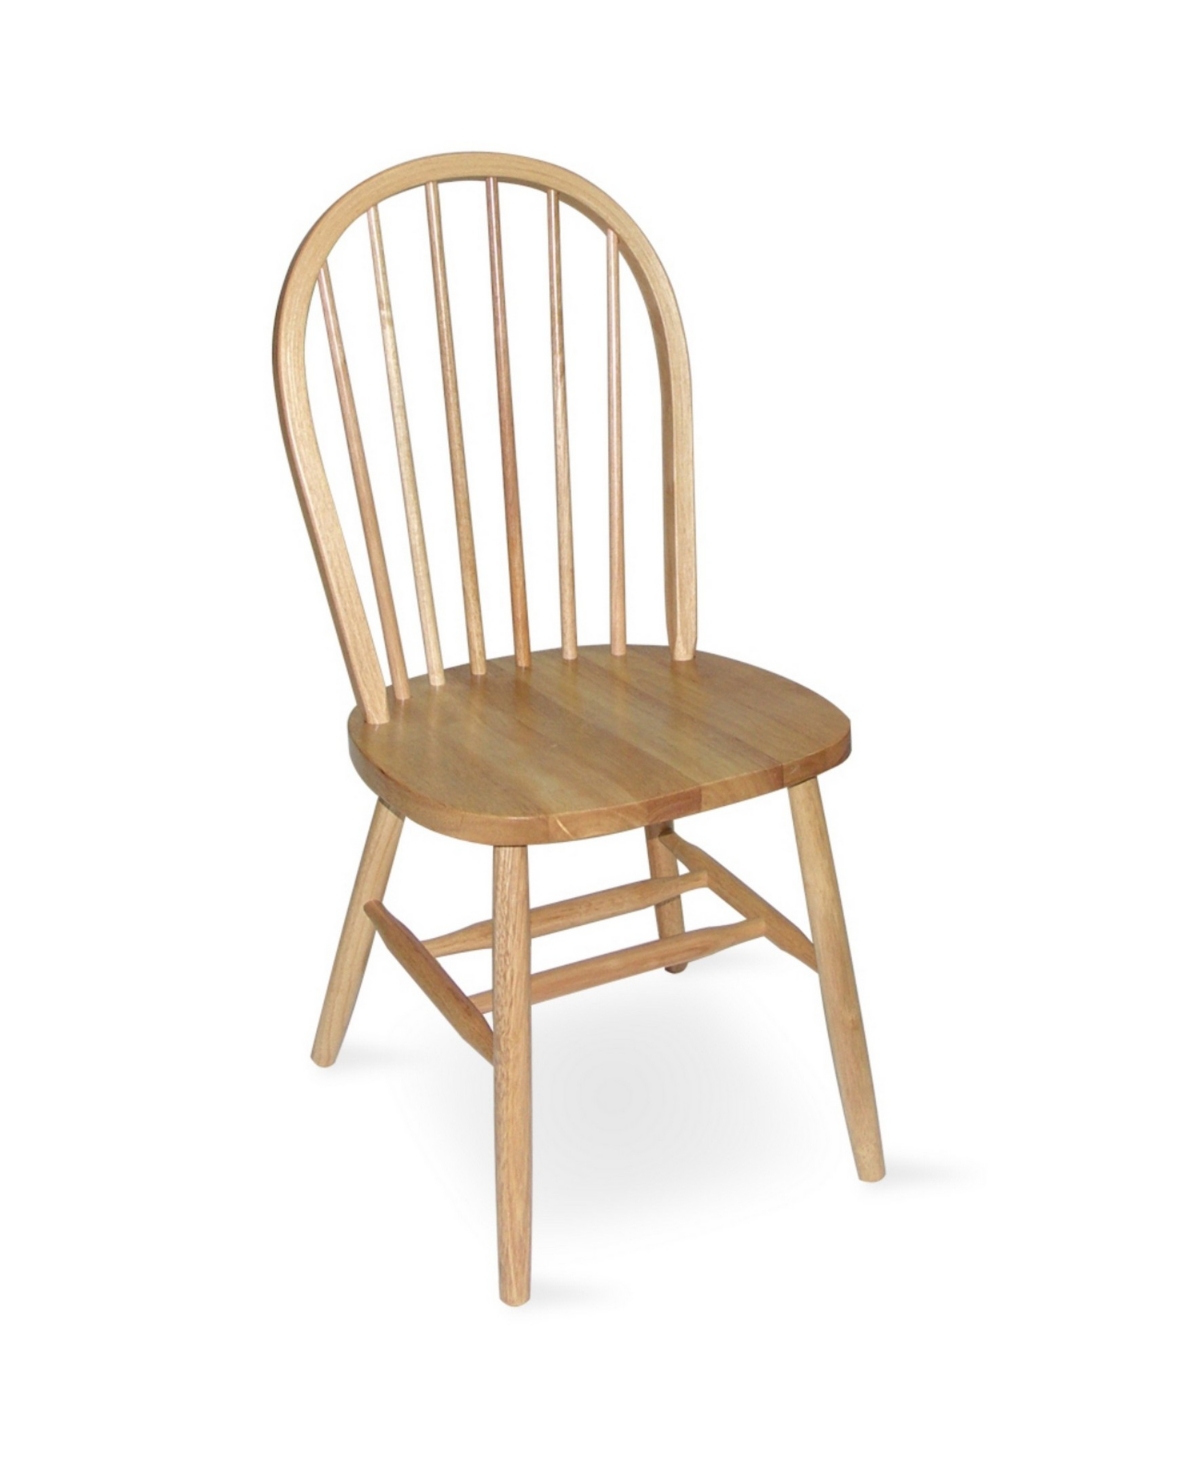 International Concepts Windsor 37" High Spindleback Chair In Tan